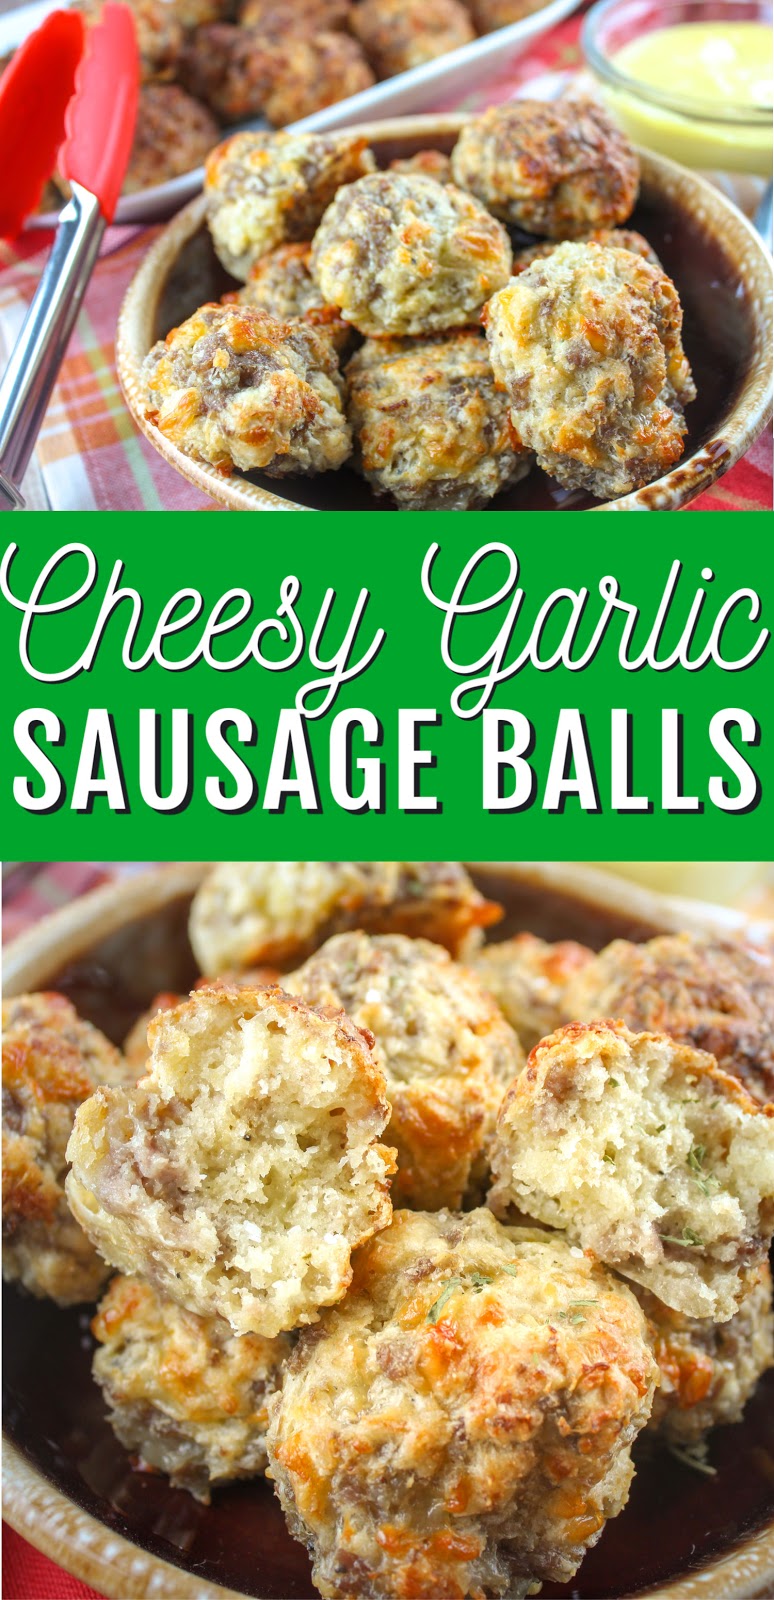 These Cheesy Garlic Sausage Balls are great for a get-together or any easy dinner night and you can bake or air fry them! And if you love Red Lobster Cheddar Biscuits – you’ll love these even more!
 via @foodhussy